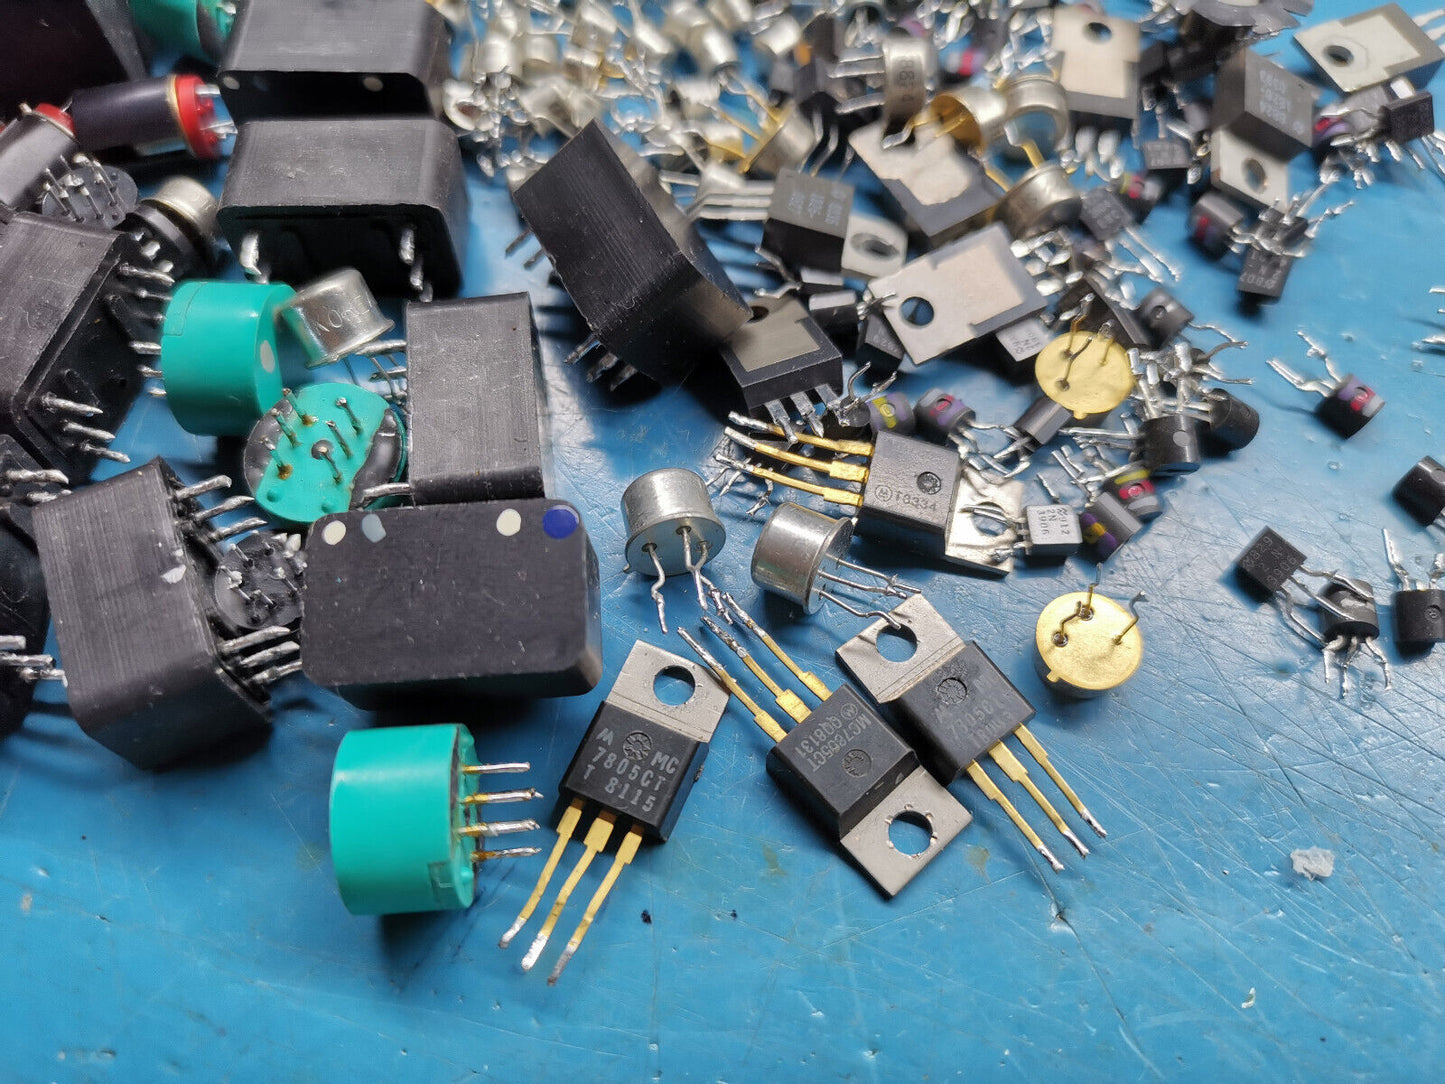 Joblot Of Various Electronic Components And Parts From HP Agilent Test Gear